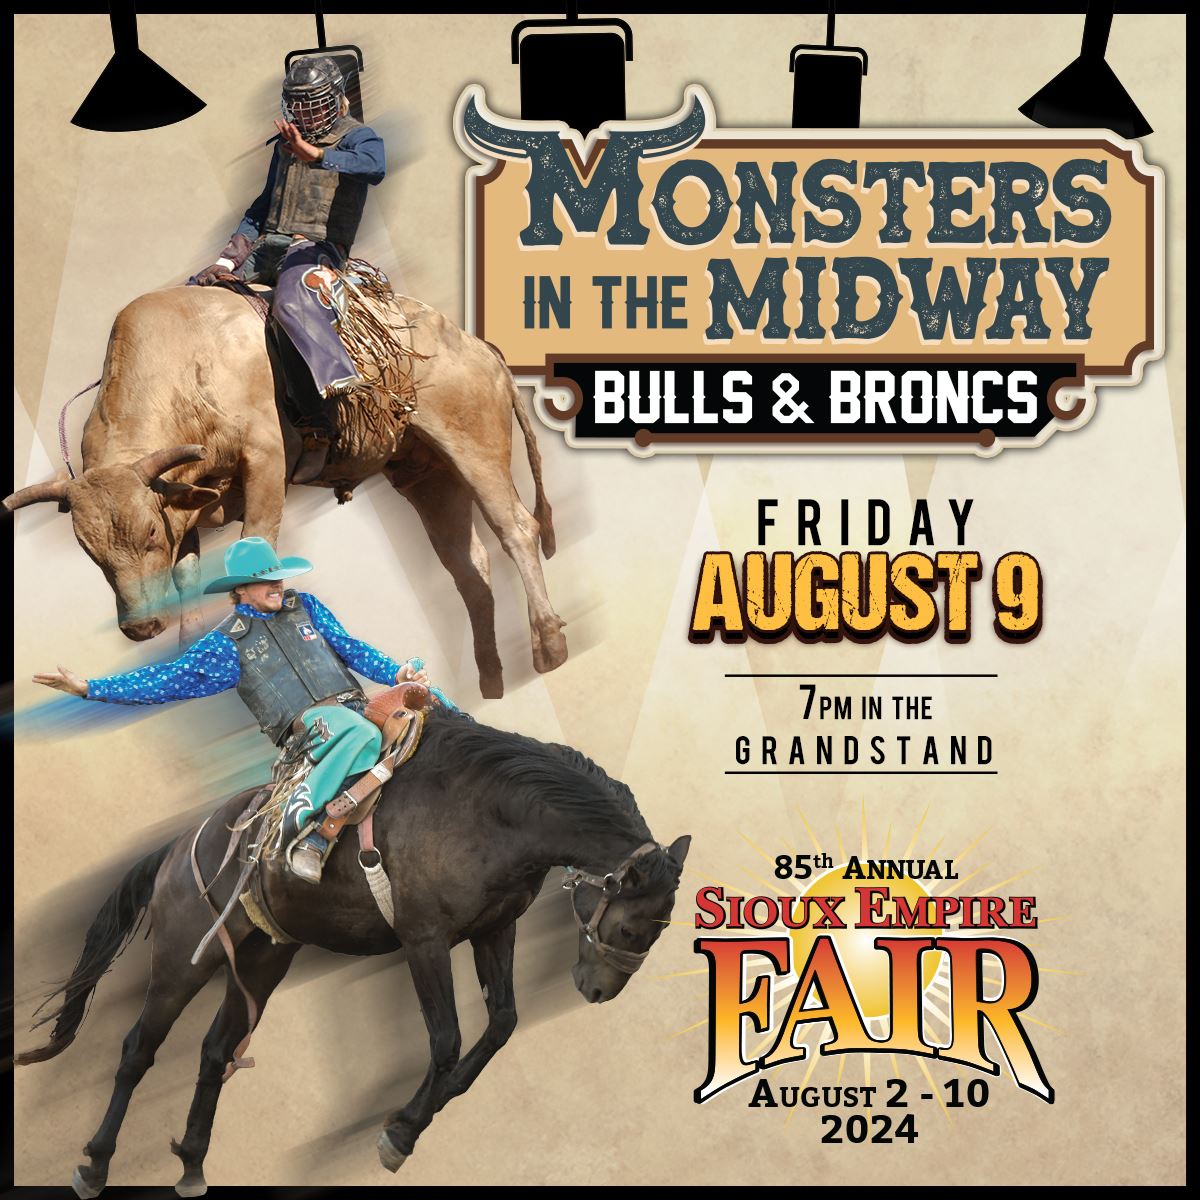 Monsters in the Midway Bulls & Broncs